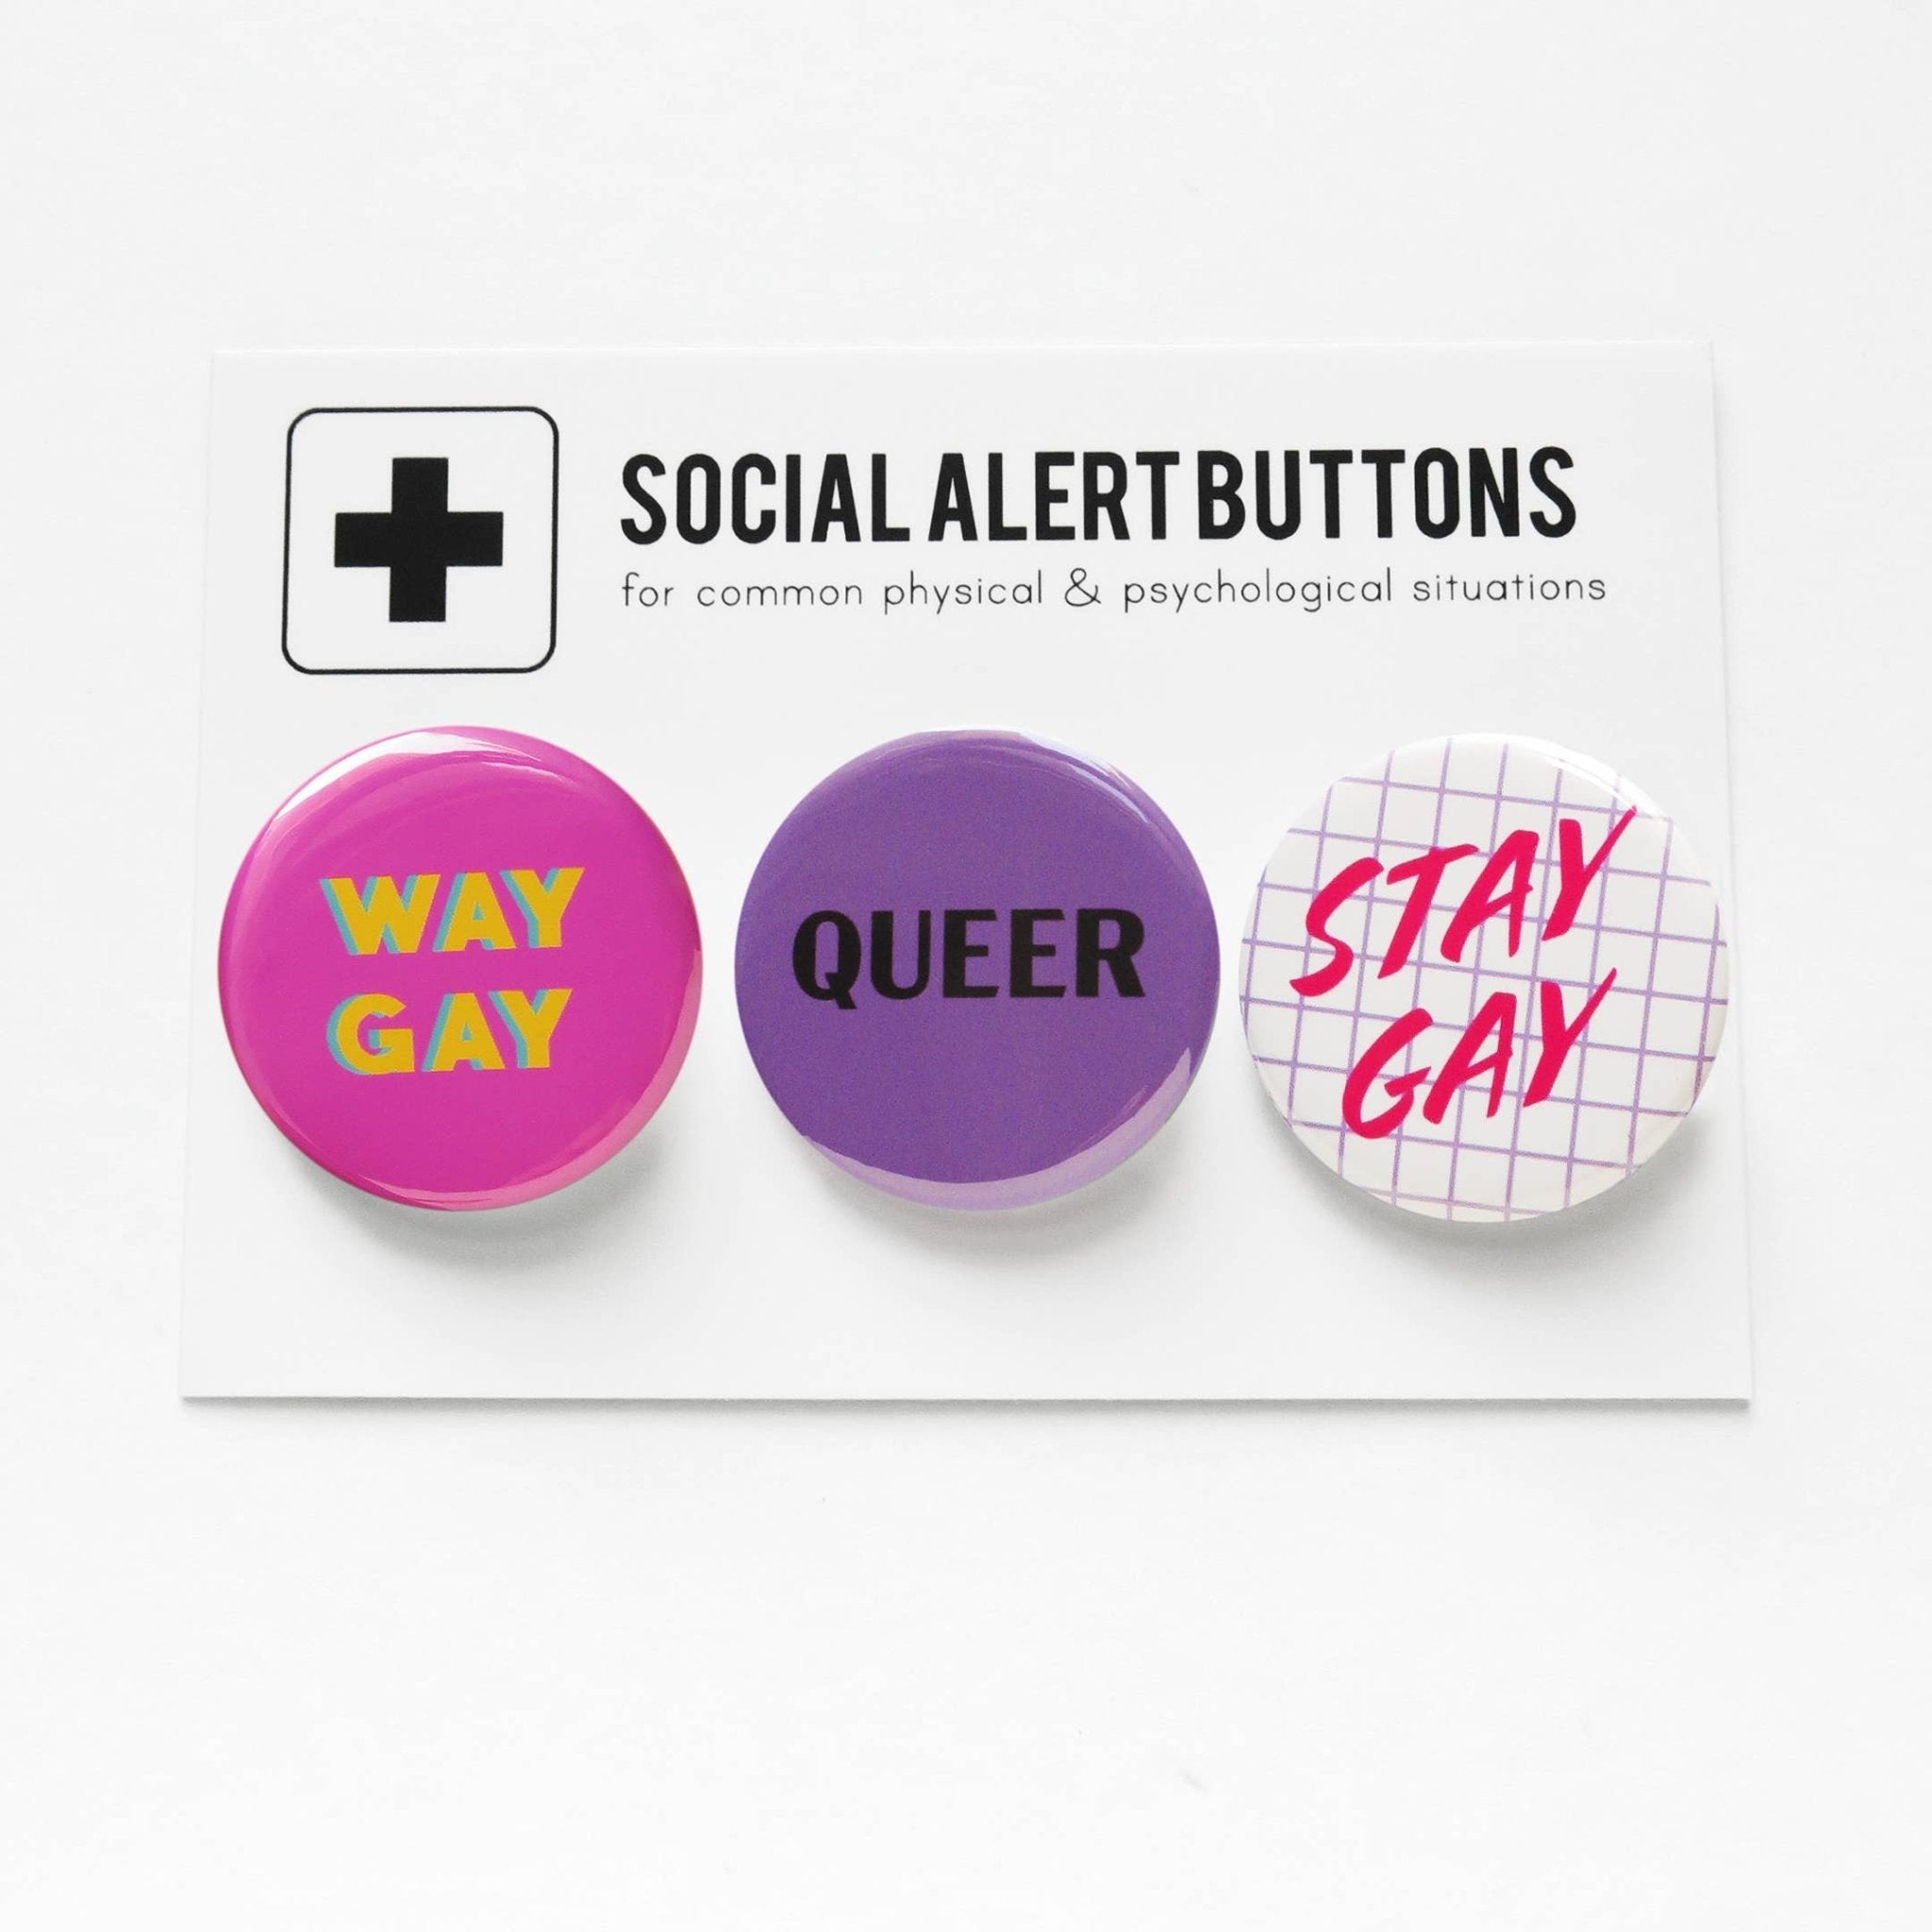 WAY GAY QUEER STAY GAY 3-PACK Pinback Buttons - Spiral Circle